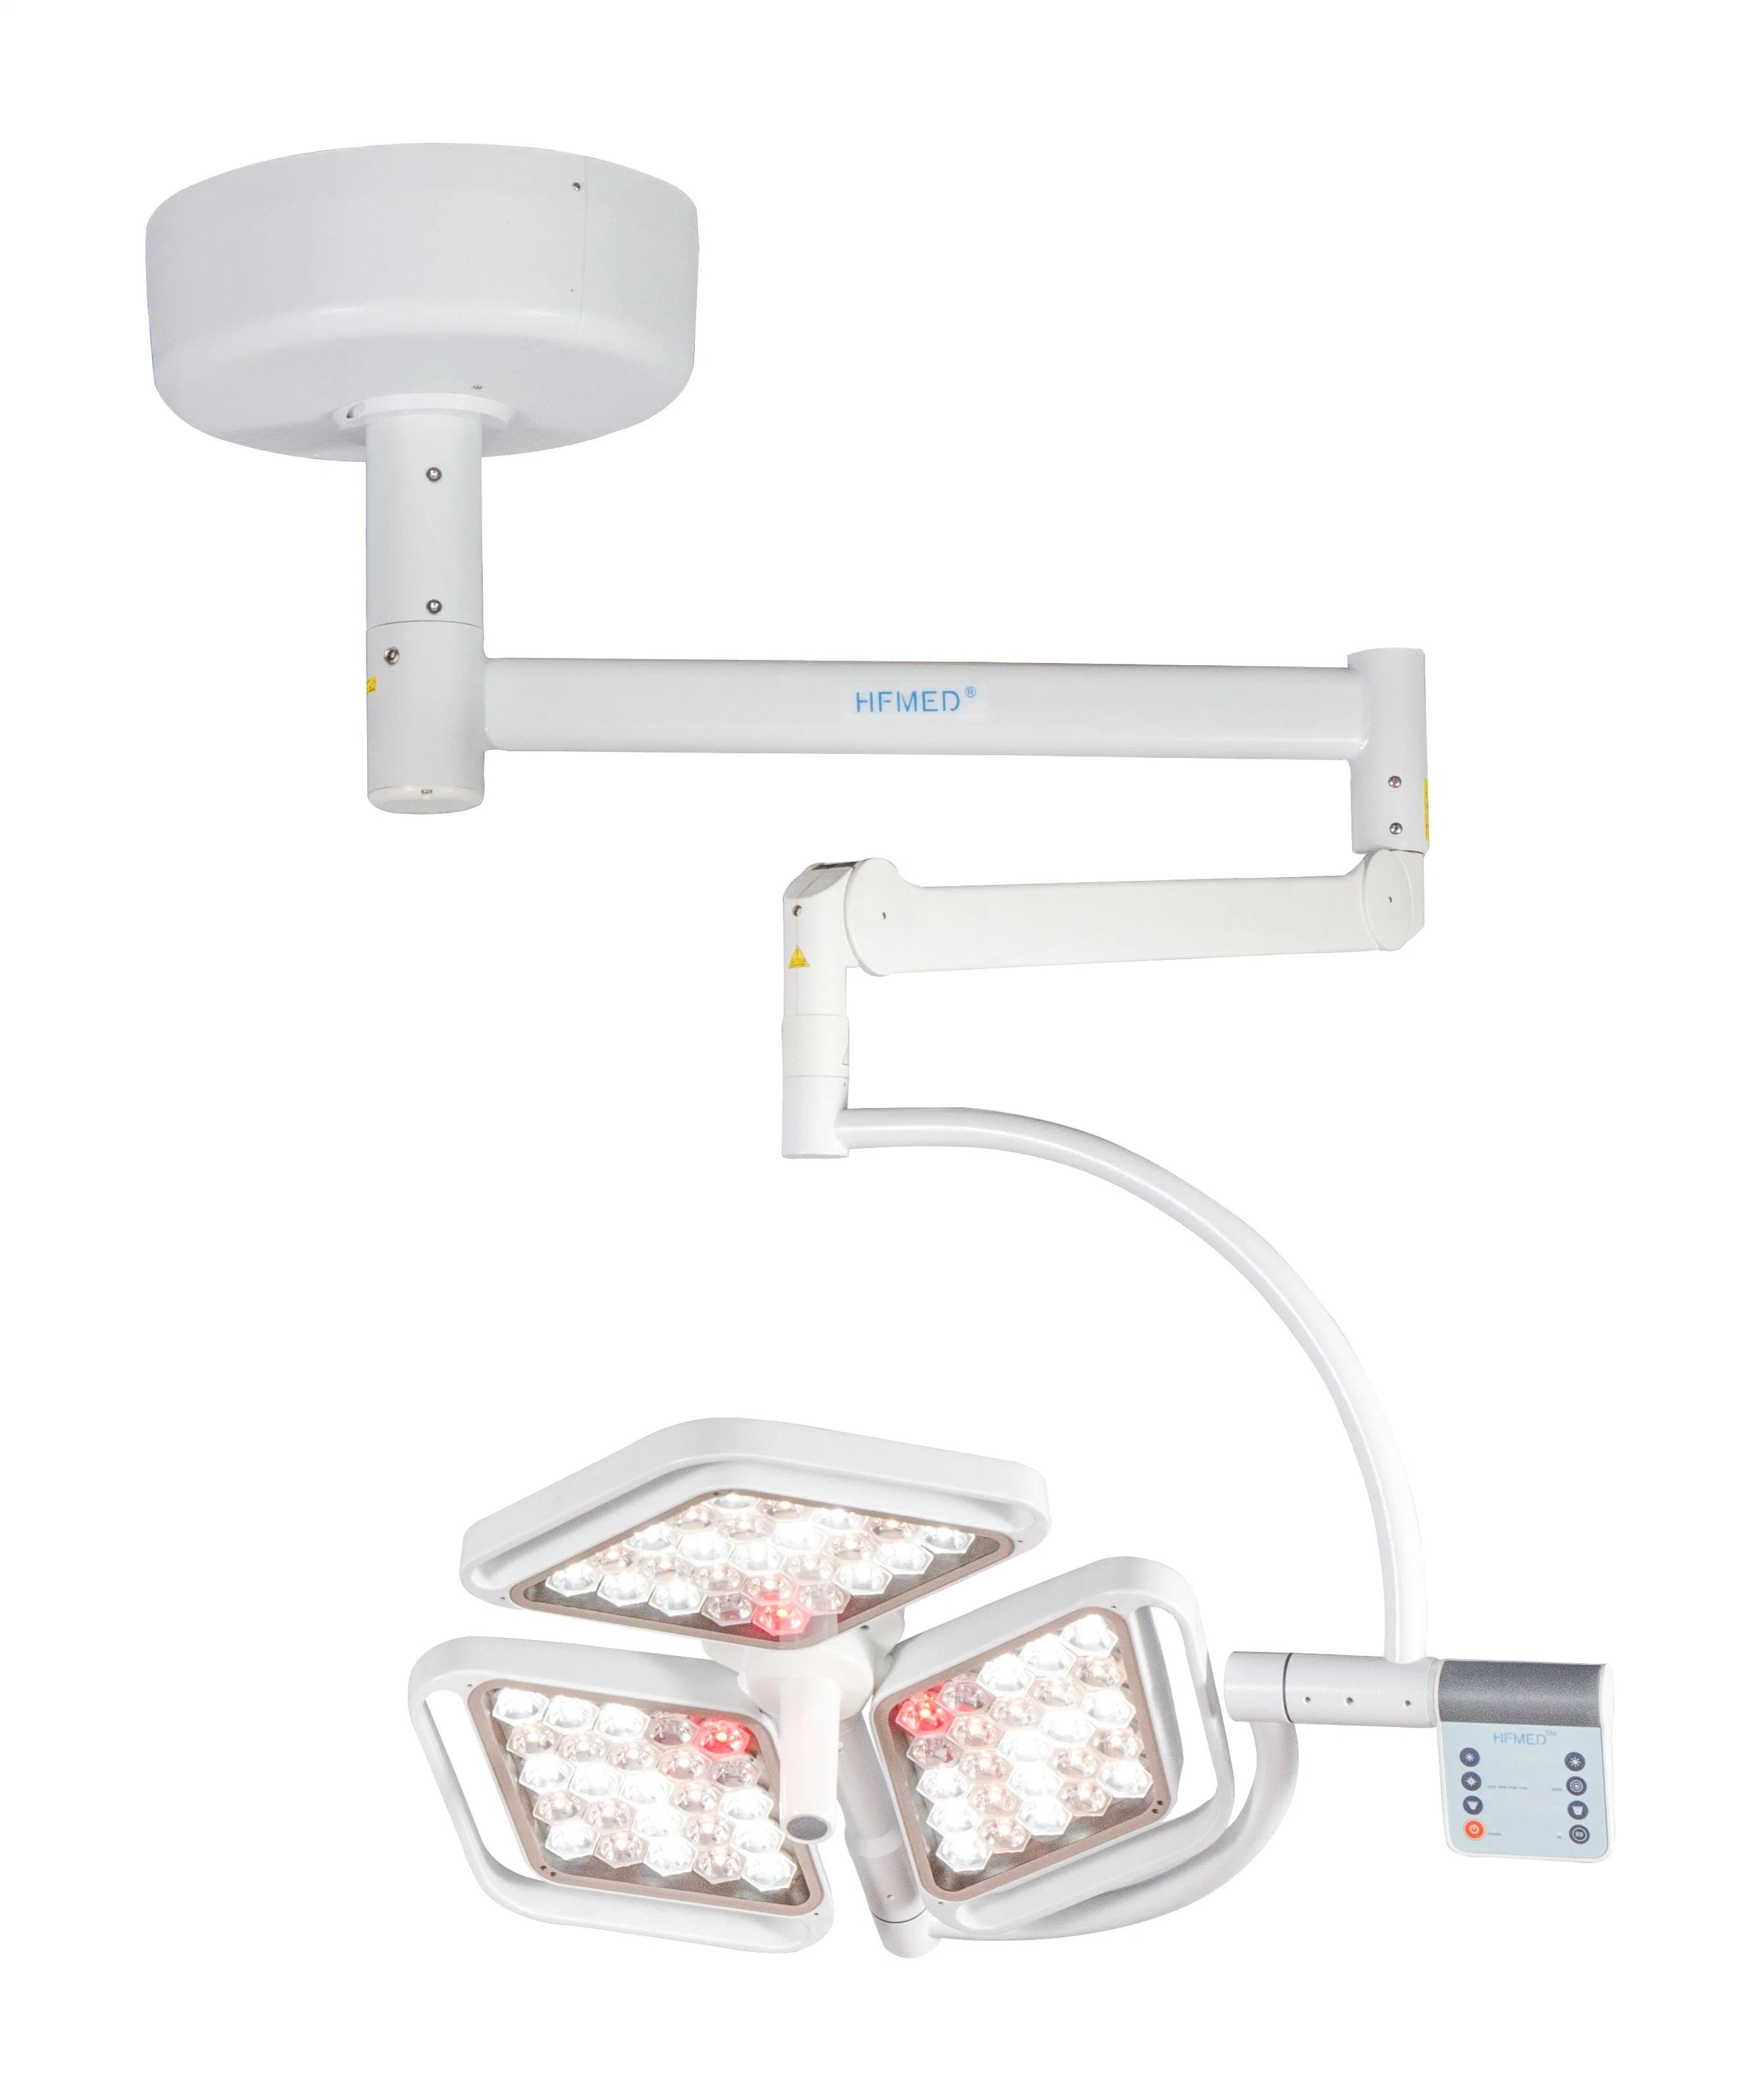 Hospital Ceiling Operating Room Shadowless LED Operating Lamp with Sterilizer Handle (HF-L3 LED)